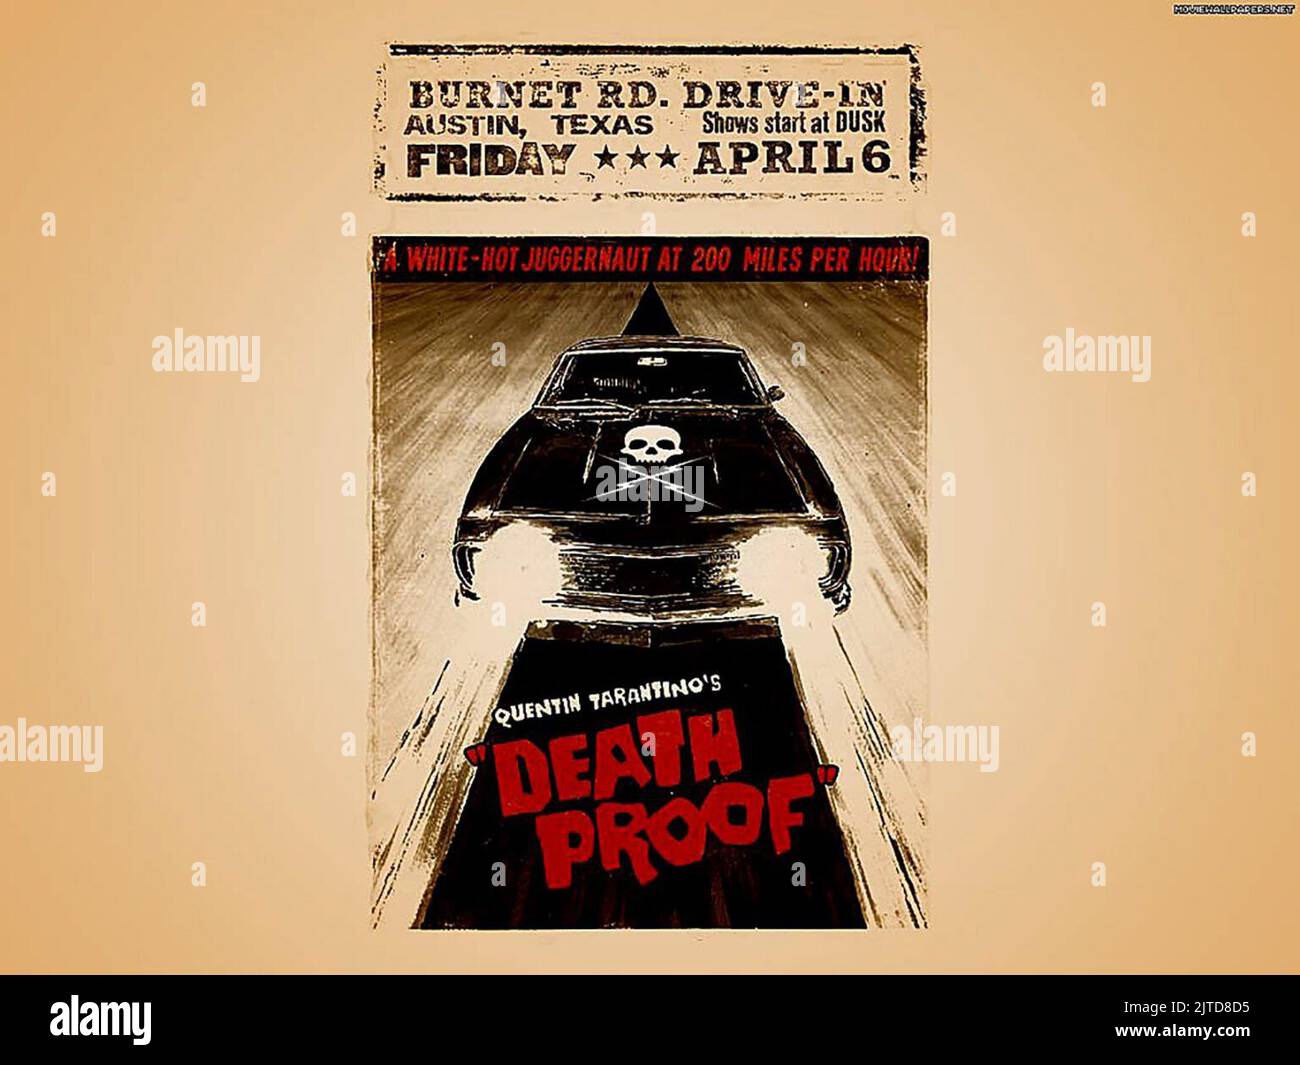 DeathProof  Death proof, Quentin tarantino, New beverly cinema